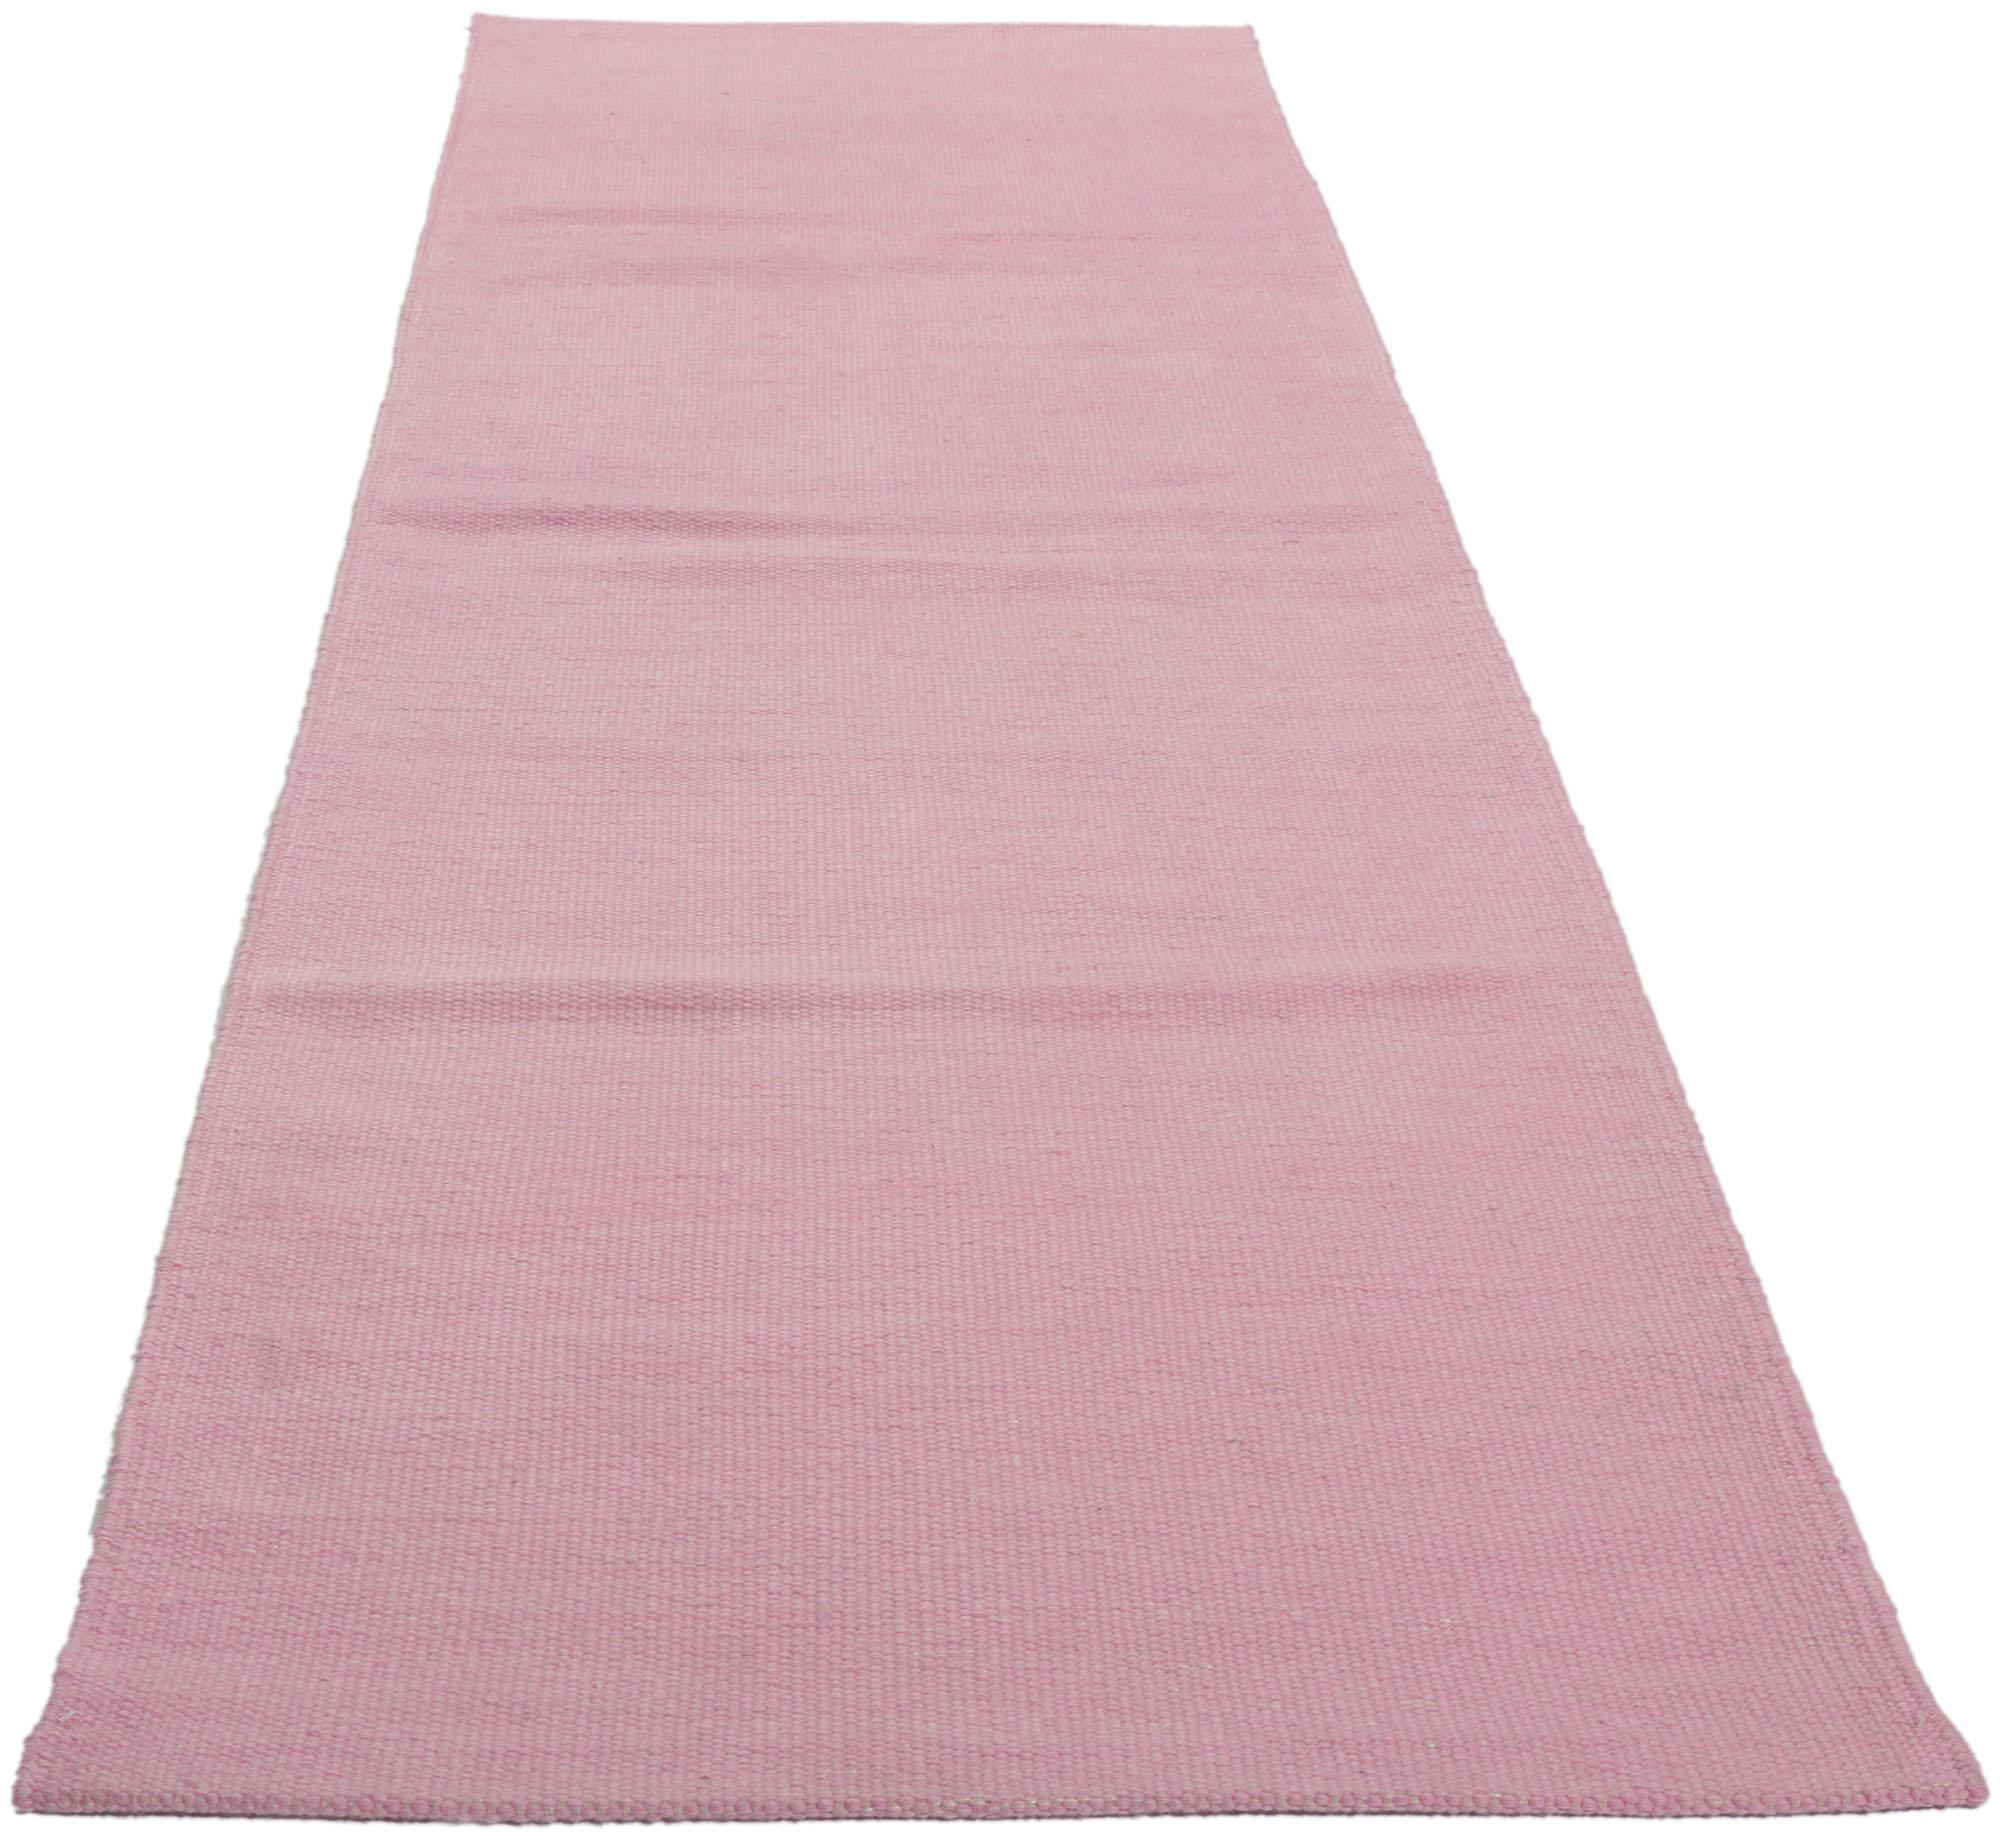 Hand-Woven New Swedish Inspired Pink Kilim Runner with Scandinavian Modern Style For Sale